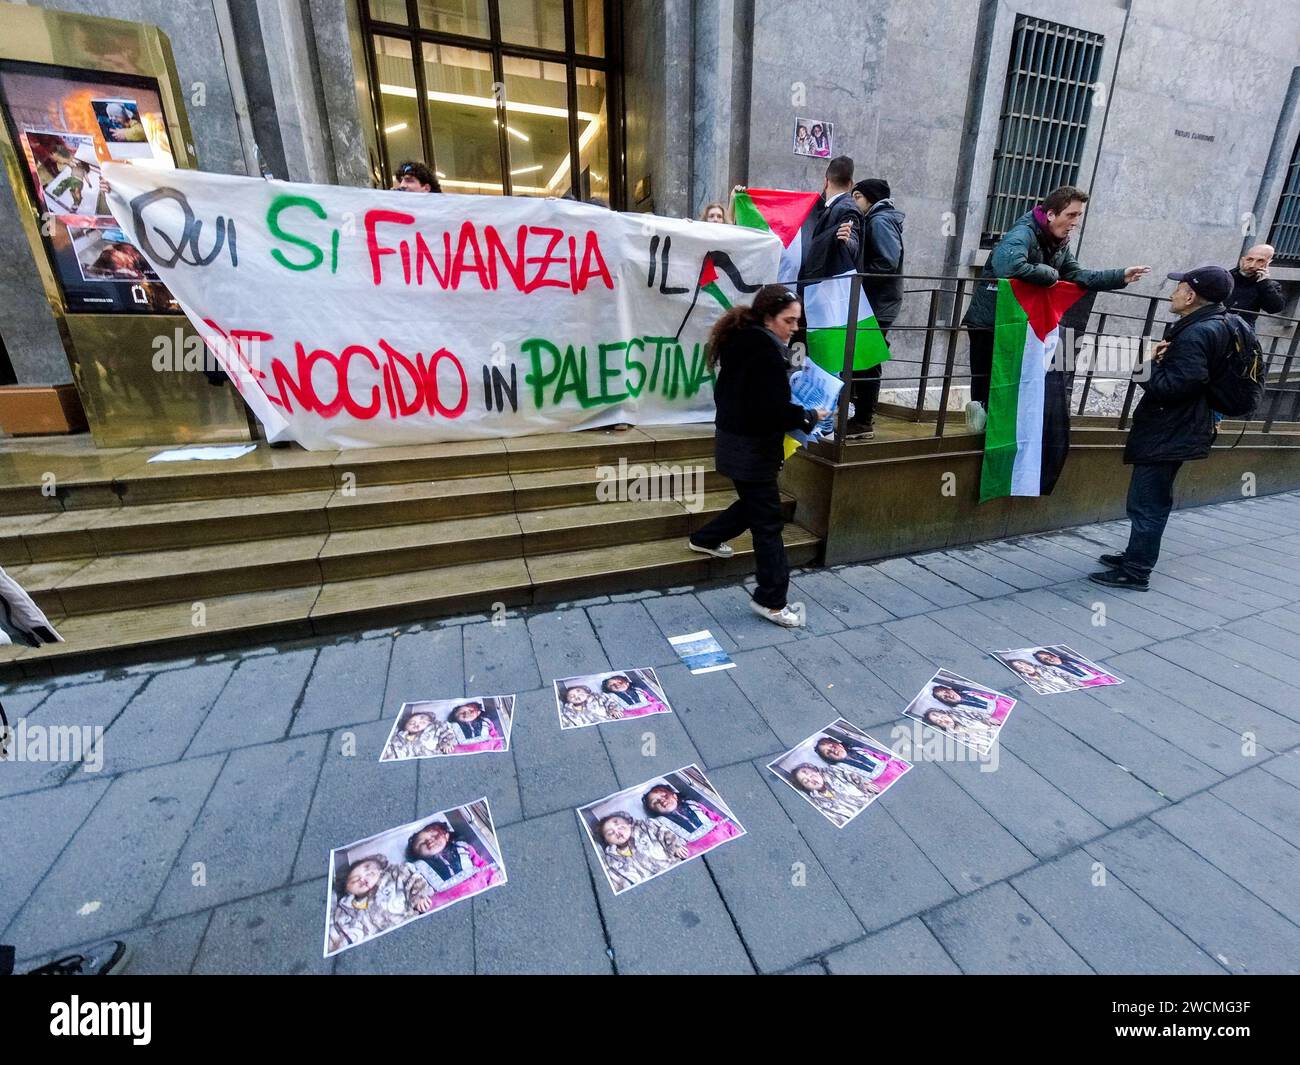 Pro-Palestinian blitz at the Intesa Sanpaolo bank Pro-Palestinian blitz at the Intesa Sanpaolo headquarters in via Toledo. This afternoon, a few dozen activists burst into the intesa san paolo bank building, chanting chants and slogans for the people of Gaza. Here the genocide in Palestine is being financed reads a large banner unfurled in front of the bank, papered by the protesters with leaflets depicting the macabre images of children who died under bombing in the Middle East. DJI 0718 Copyright: xAntonioxBalascox Stock Photo